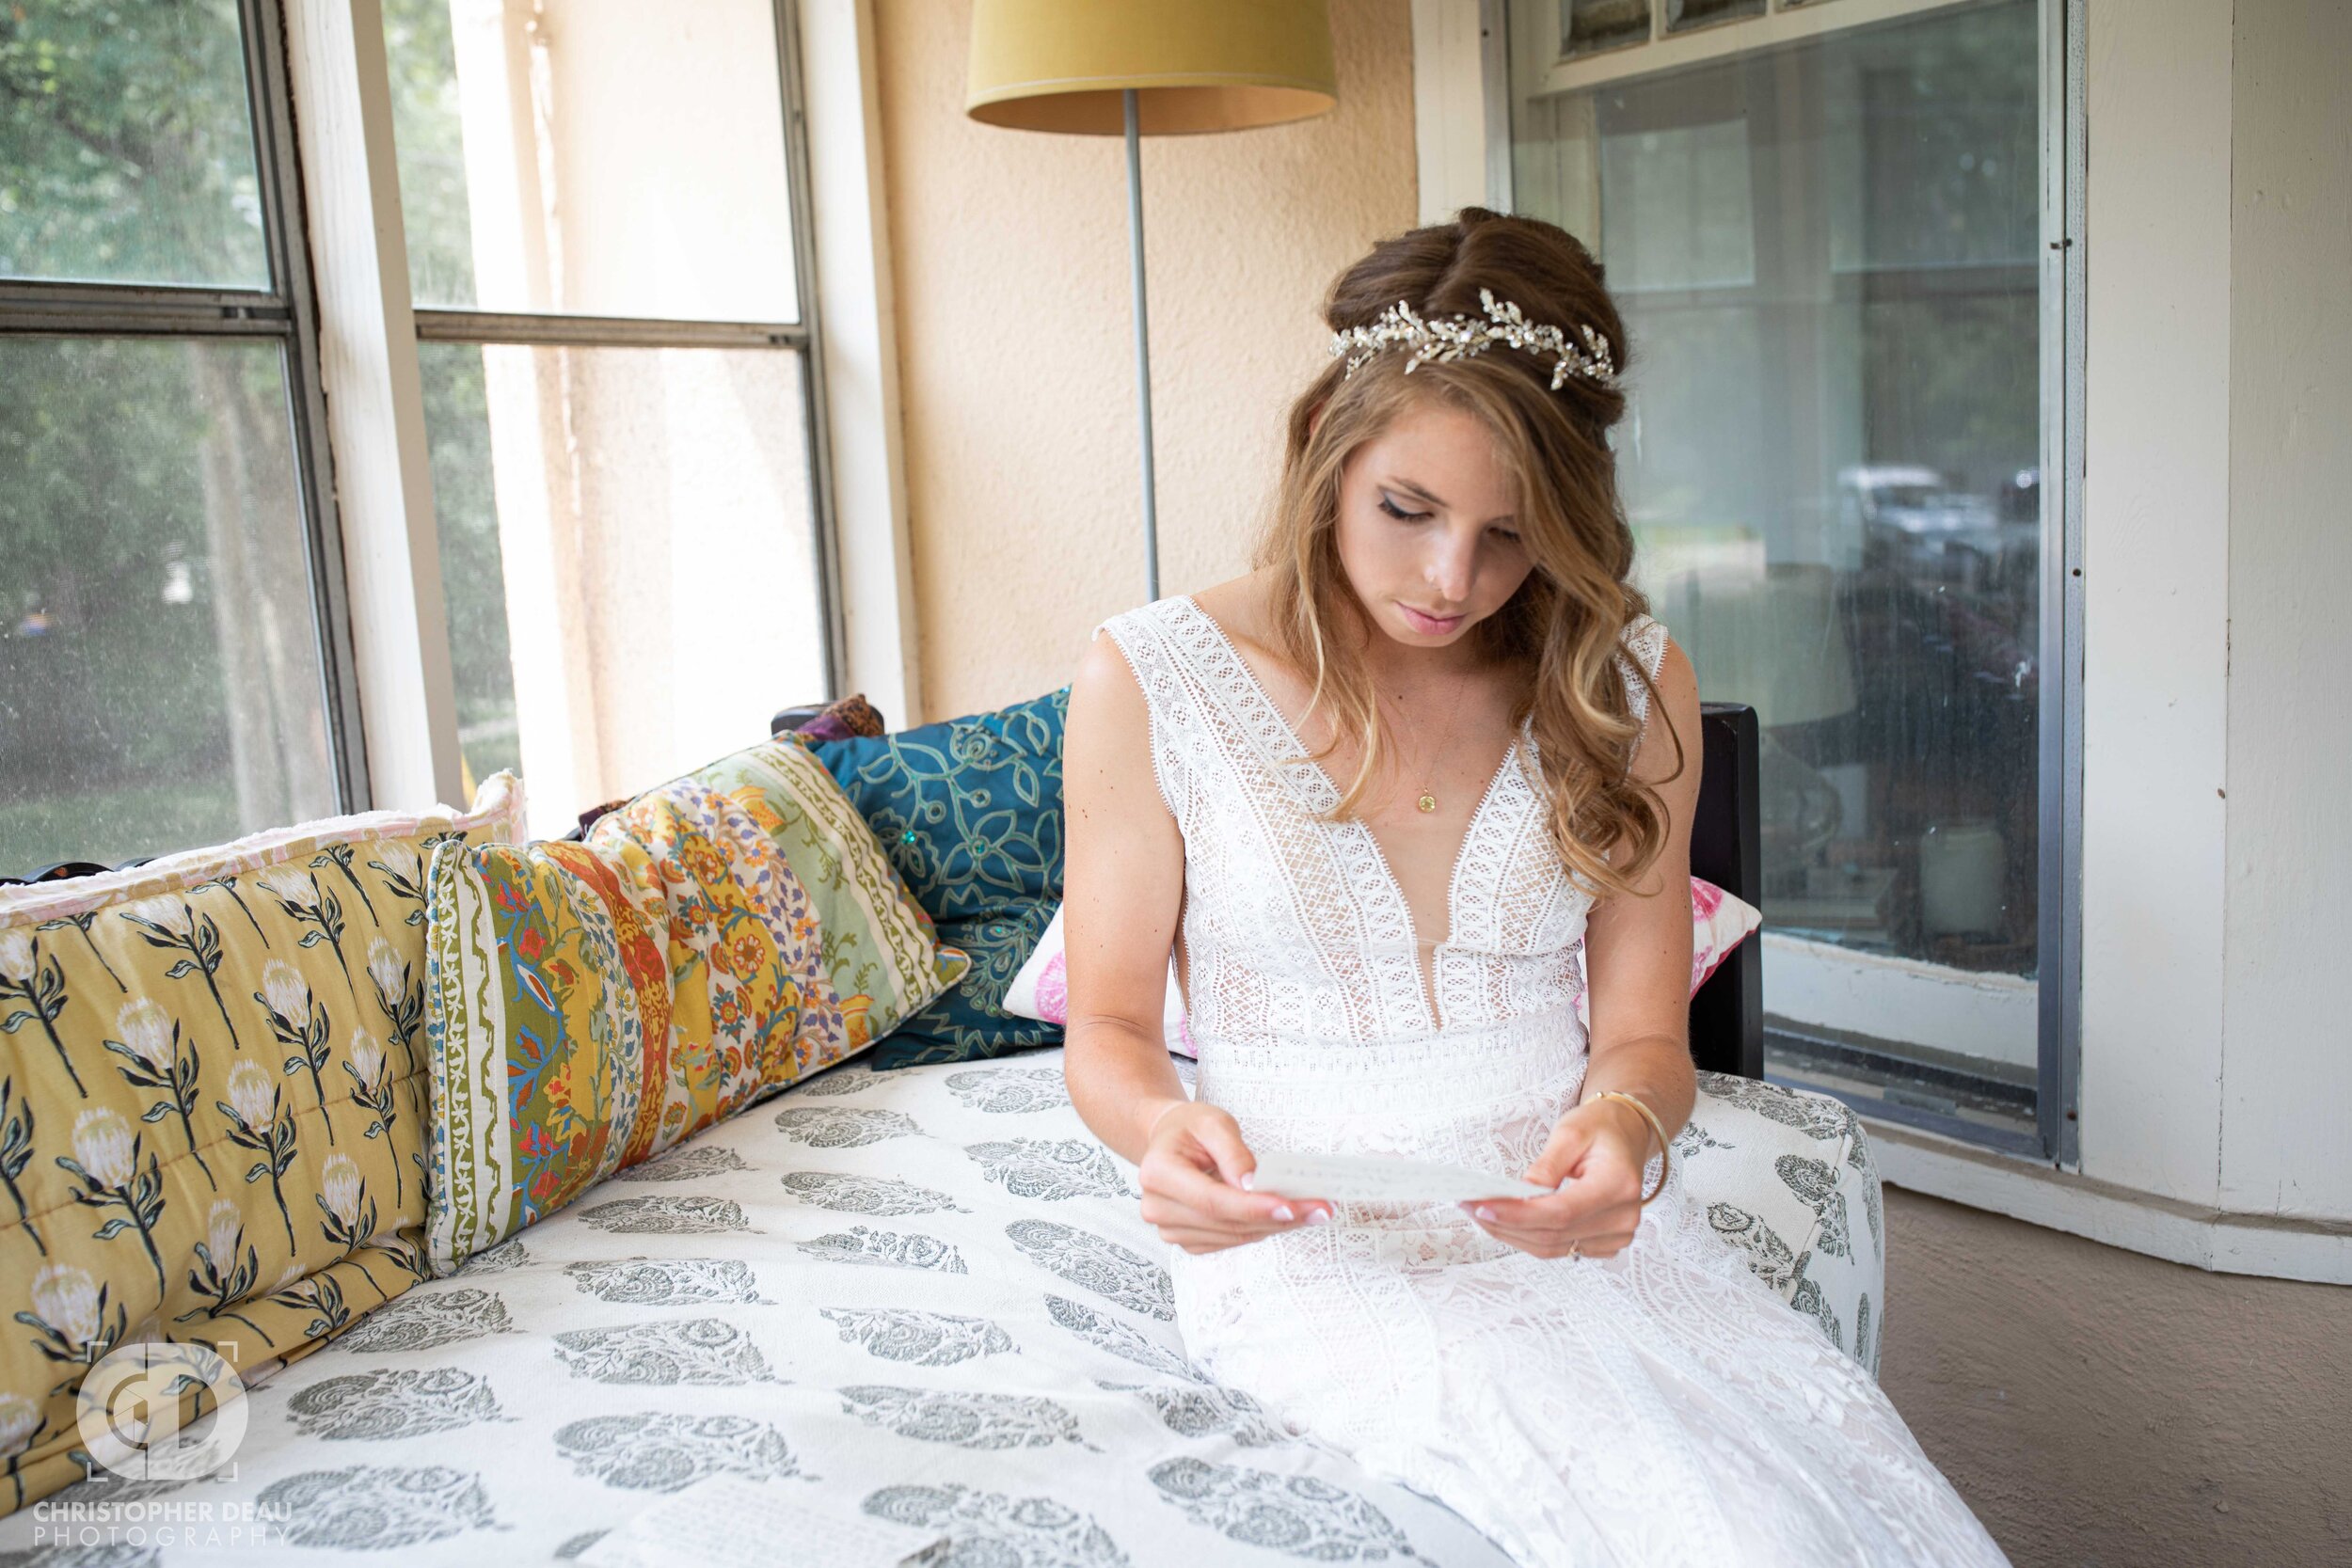  Bride reading a letter from the groom before the wedding ceremony 